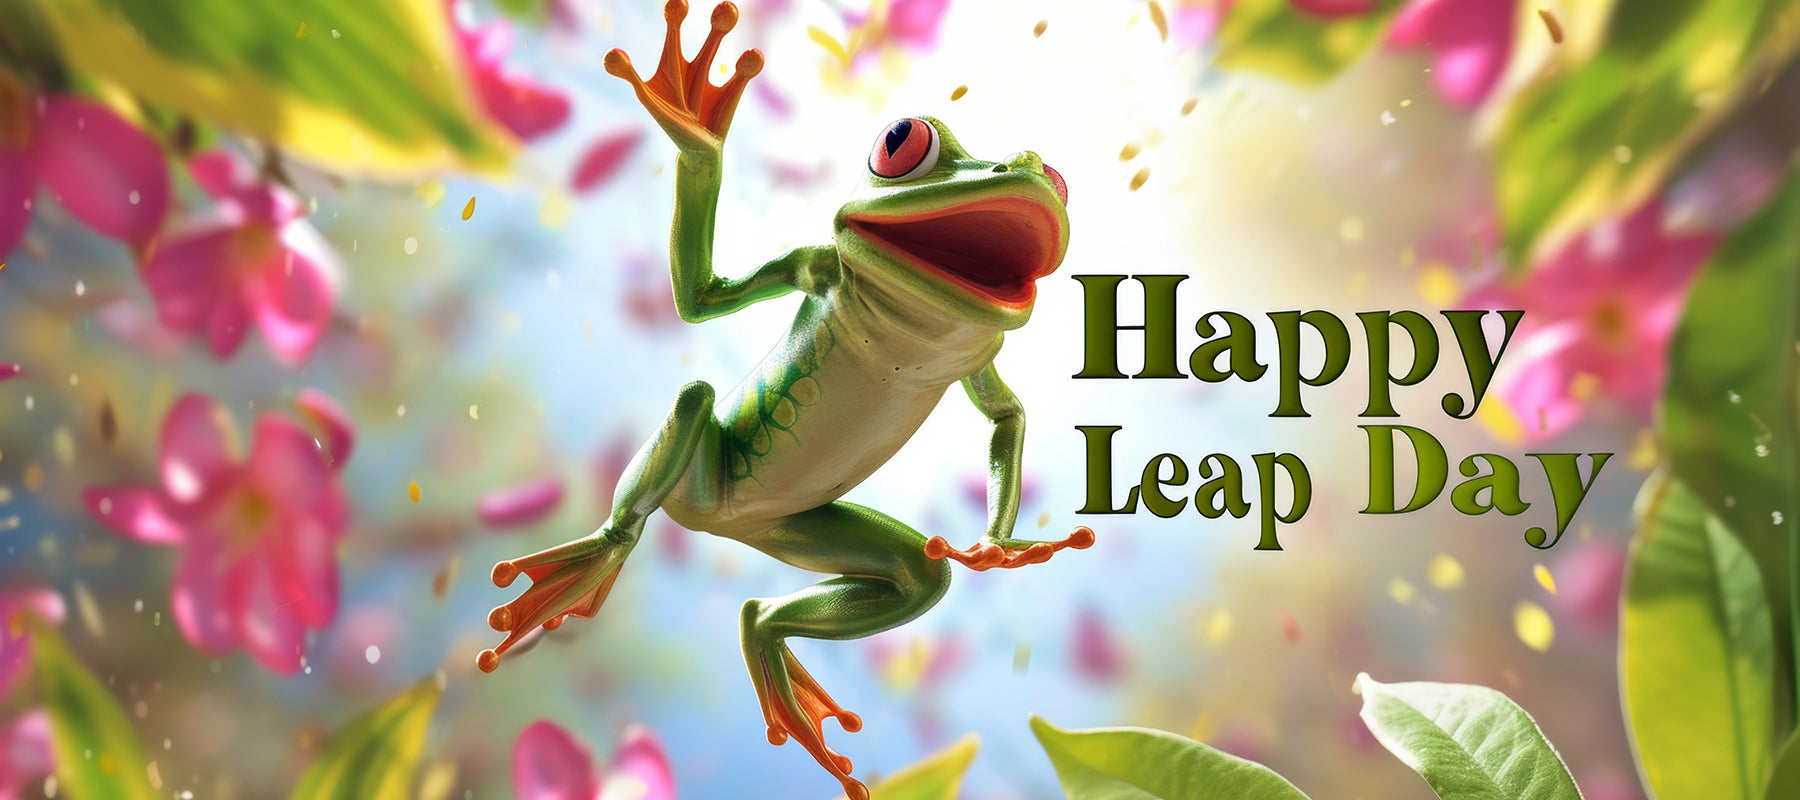 It's a leap day today!